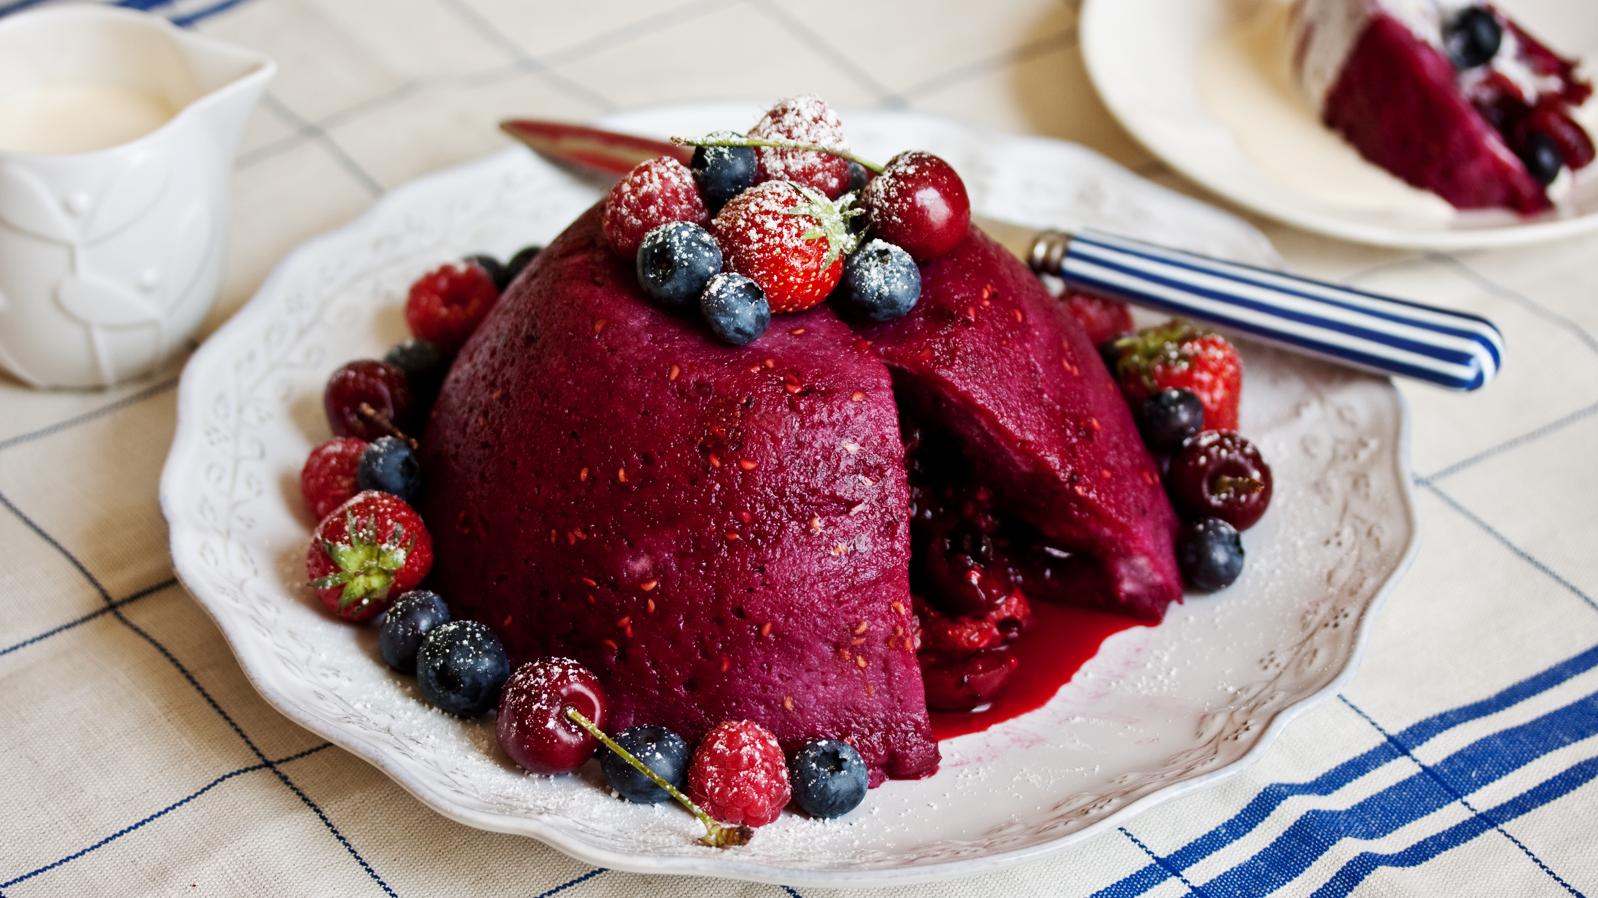  Summer never tasted so good - this English pudding is a must-try!